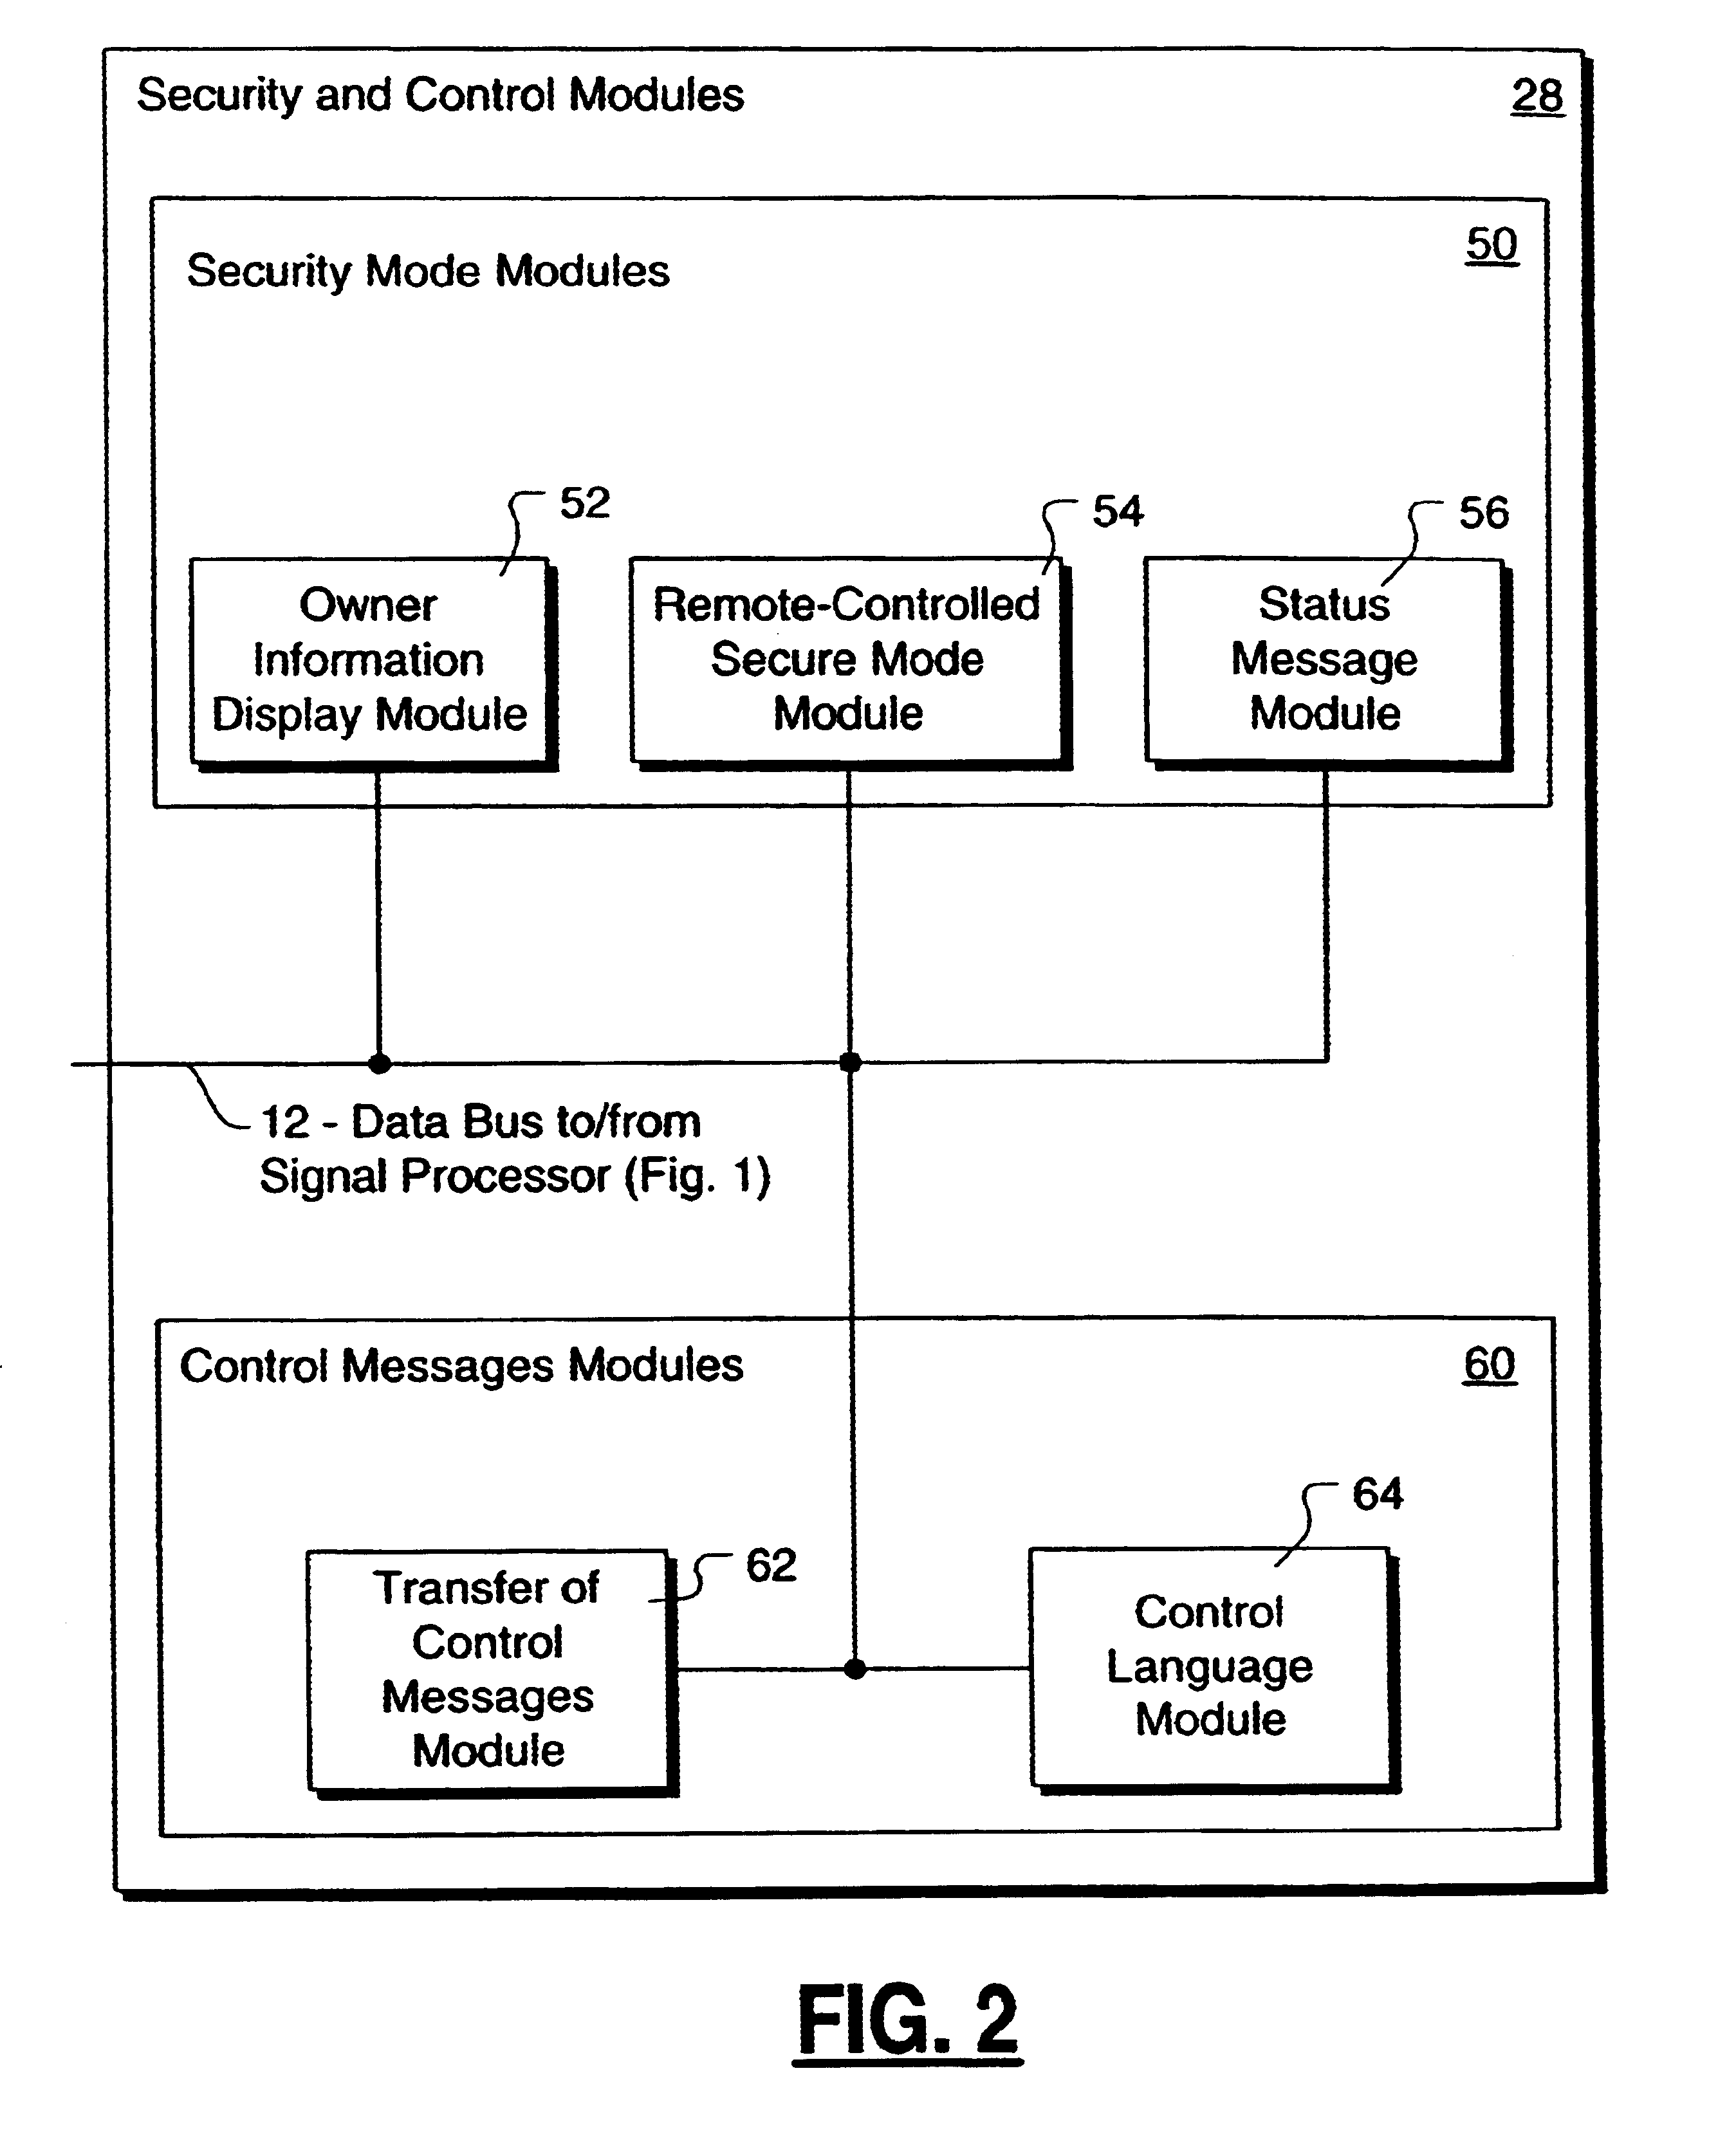 Method and apparatus for controlling and securing mobile phones that are lost, stolen or misused